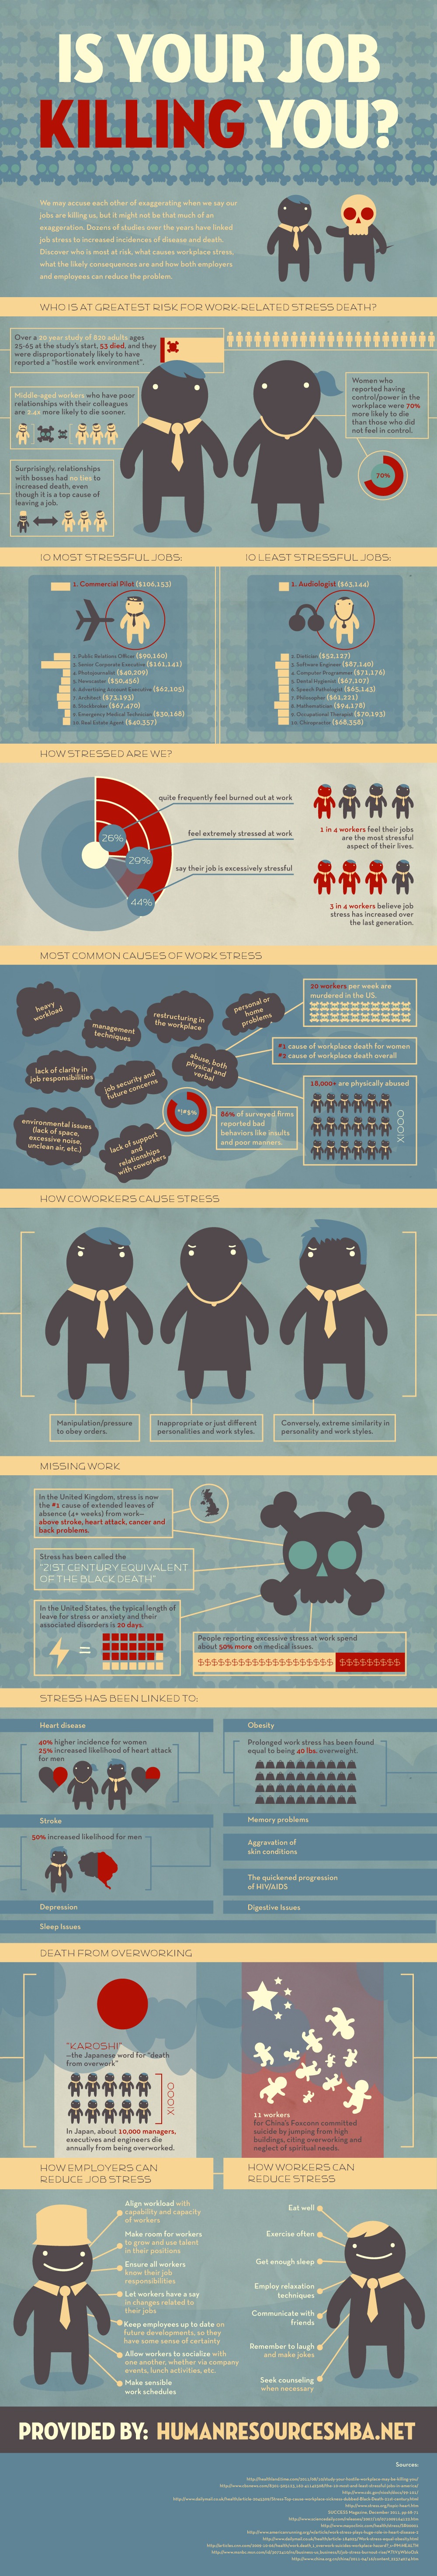 Infographic: Is Your Job Killing You?